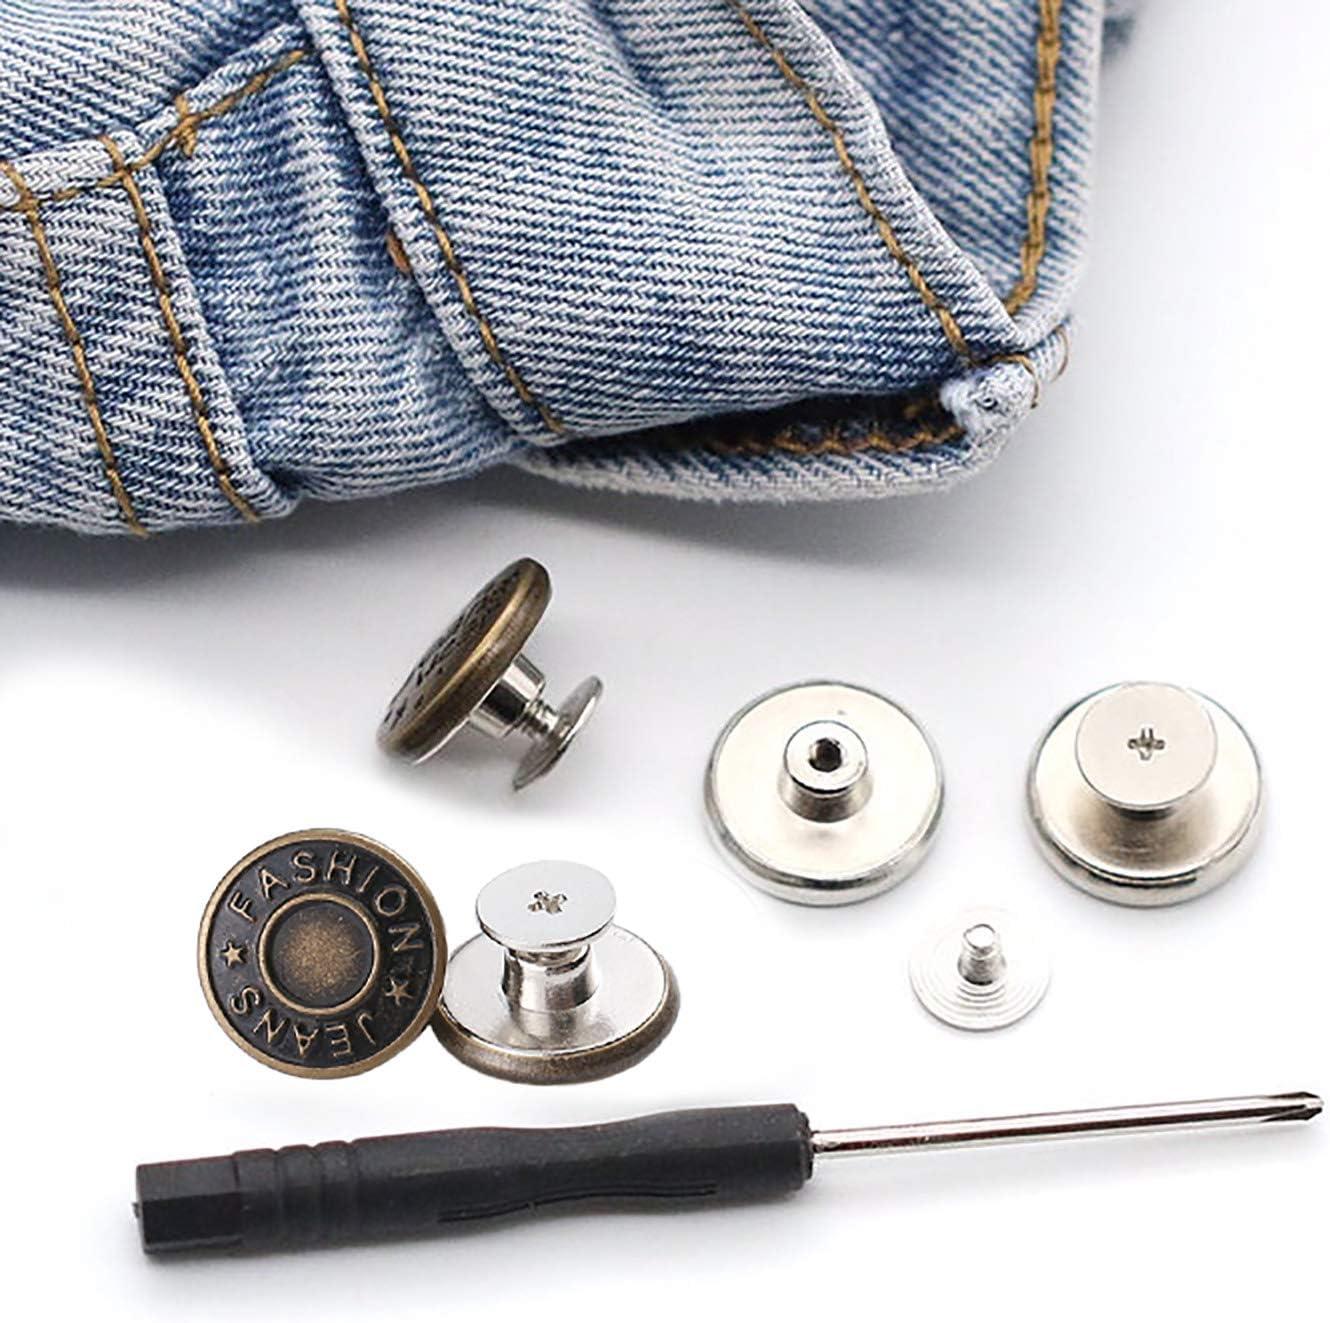 GIYOMI 20mm No Sewing Jeans Buttons Replacement Kit with Metal Base,12 Sets  Nailess Removable Metal Buttons Replacement Repair Combo Thread Rivets and  Screwdrivers (0.79 inch)